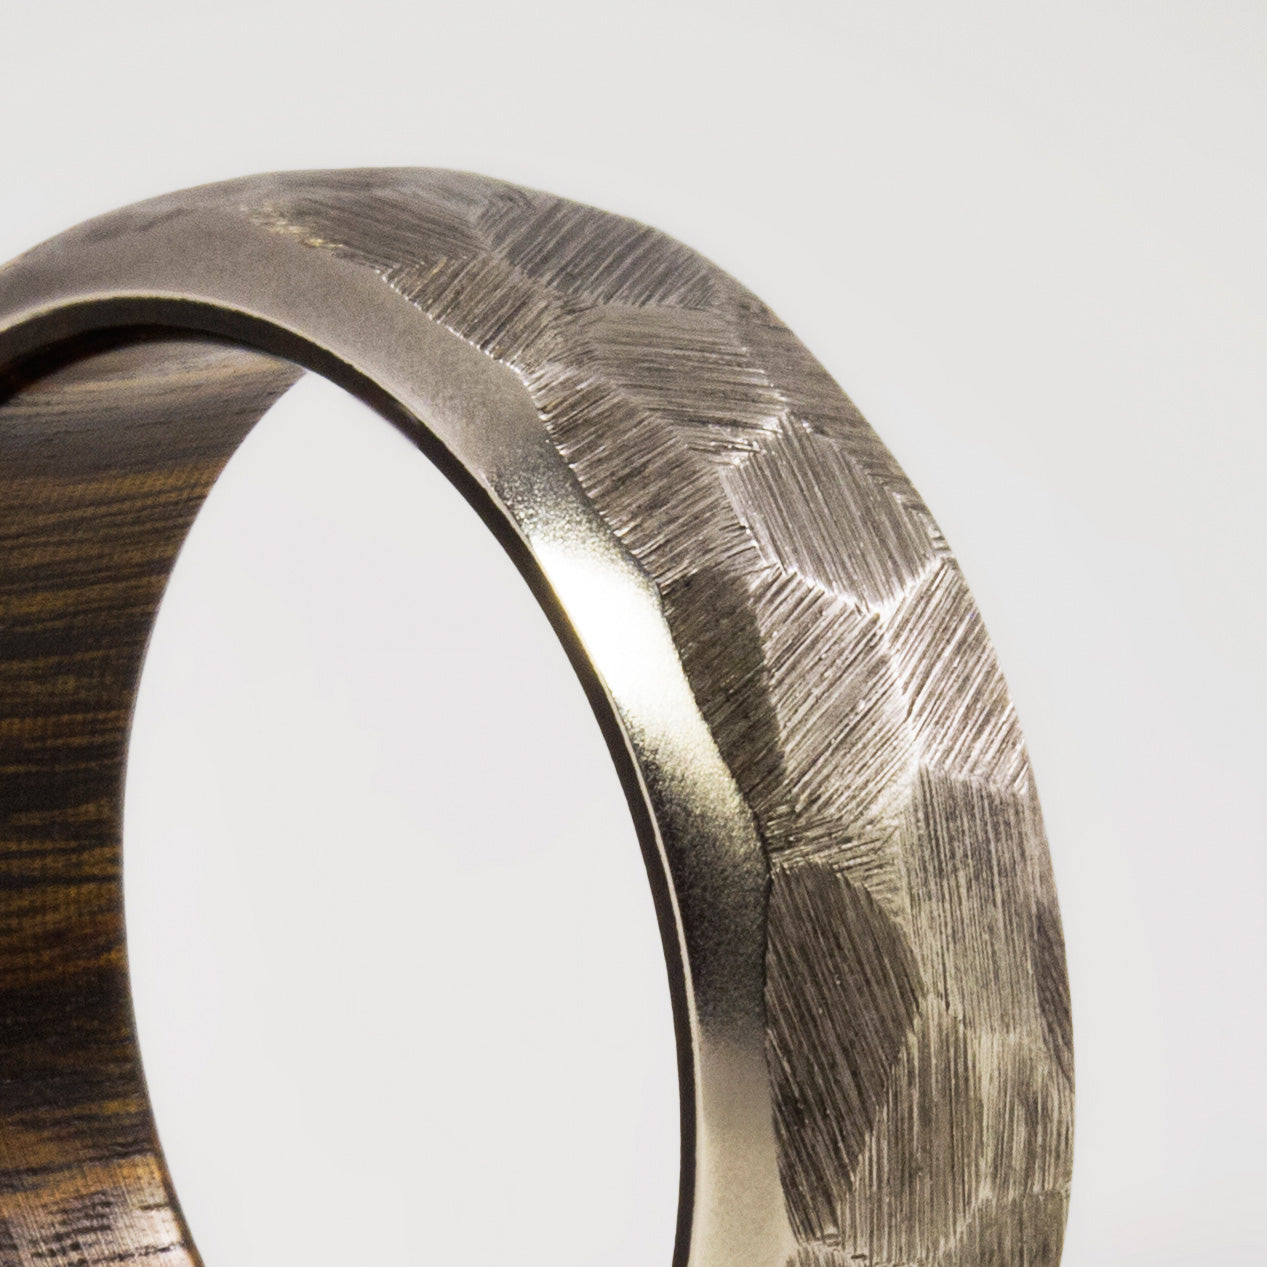 Hammered titanium and wood ring